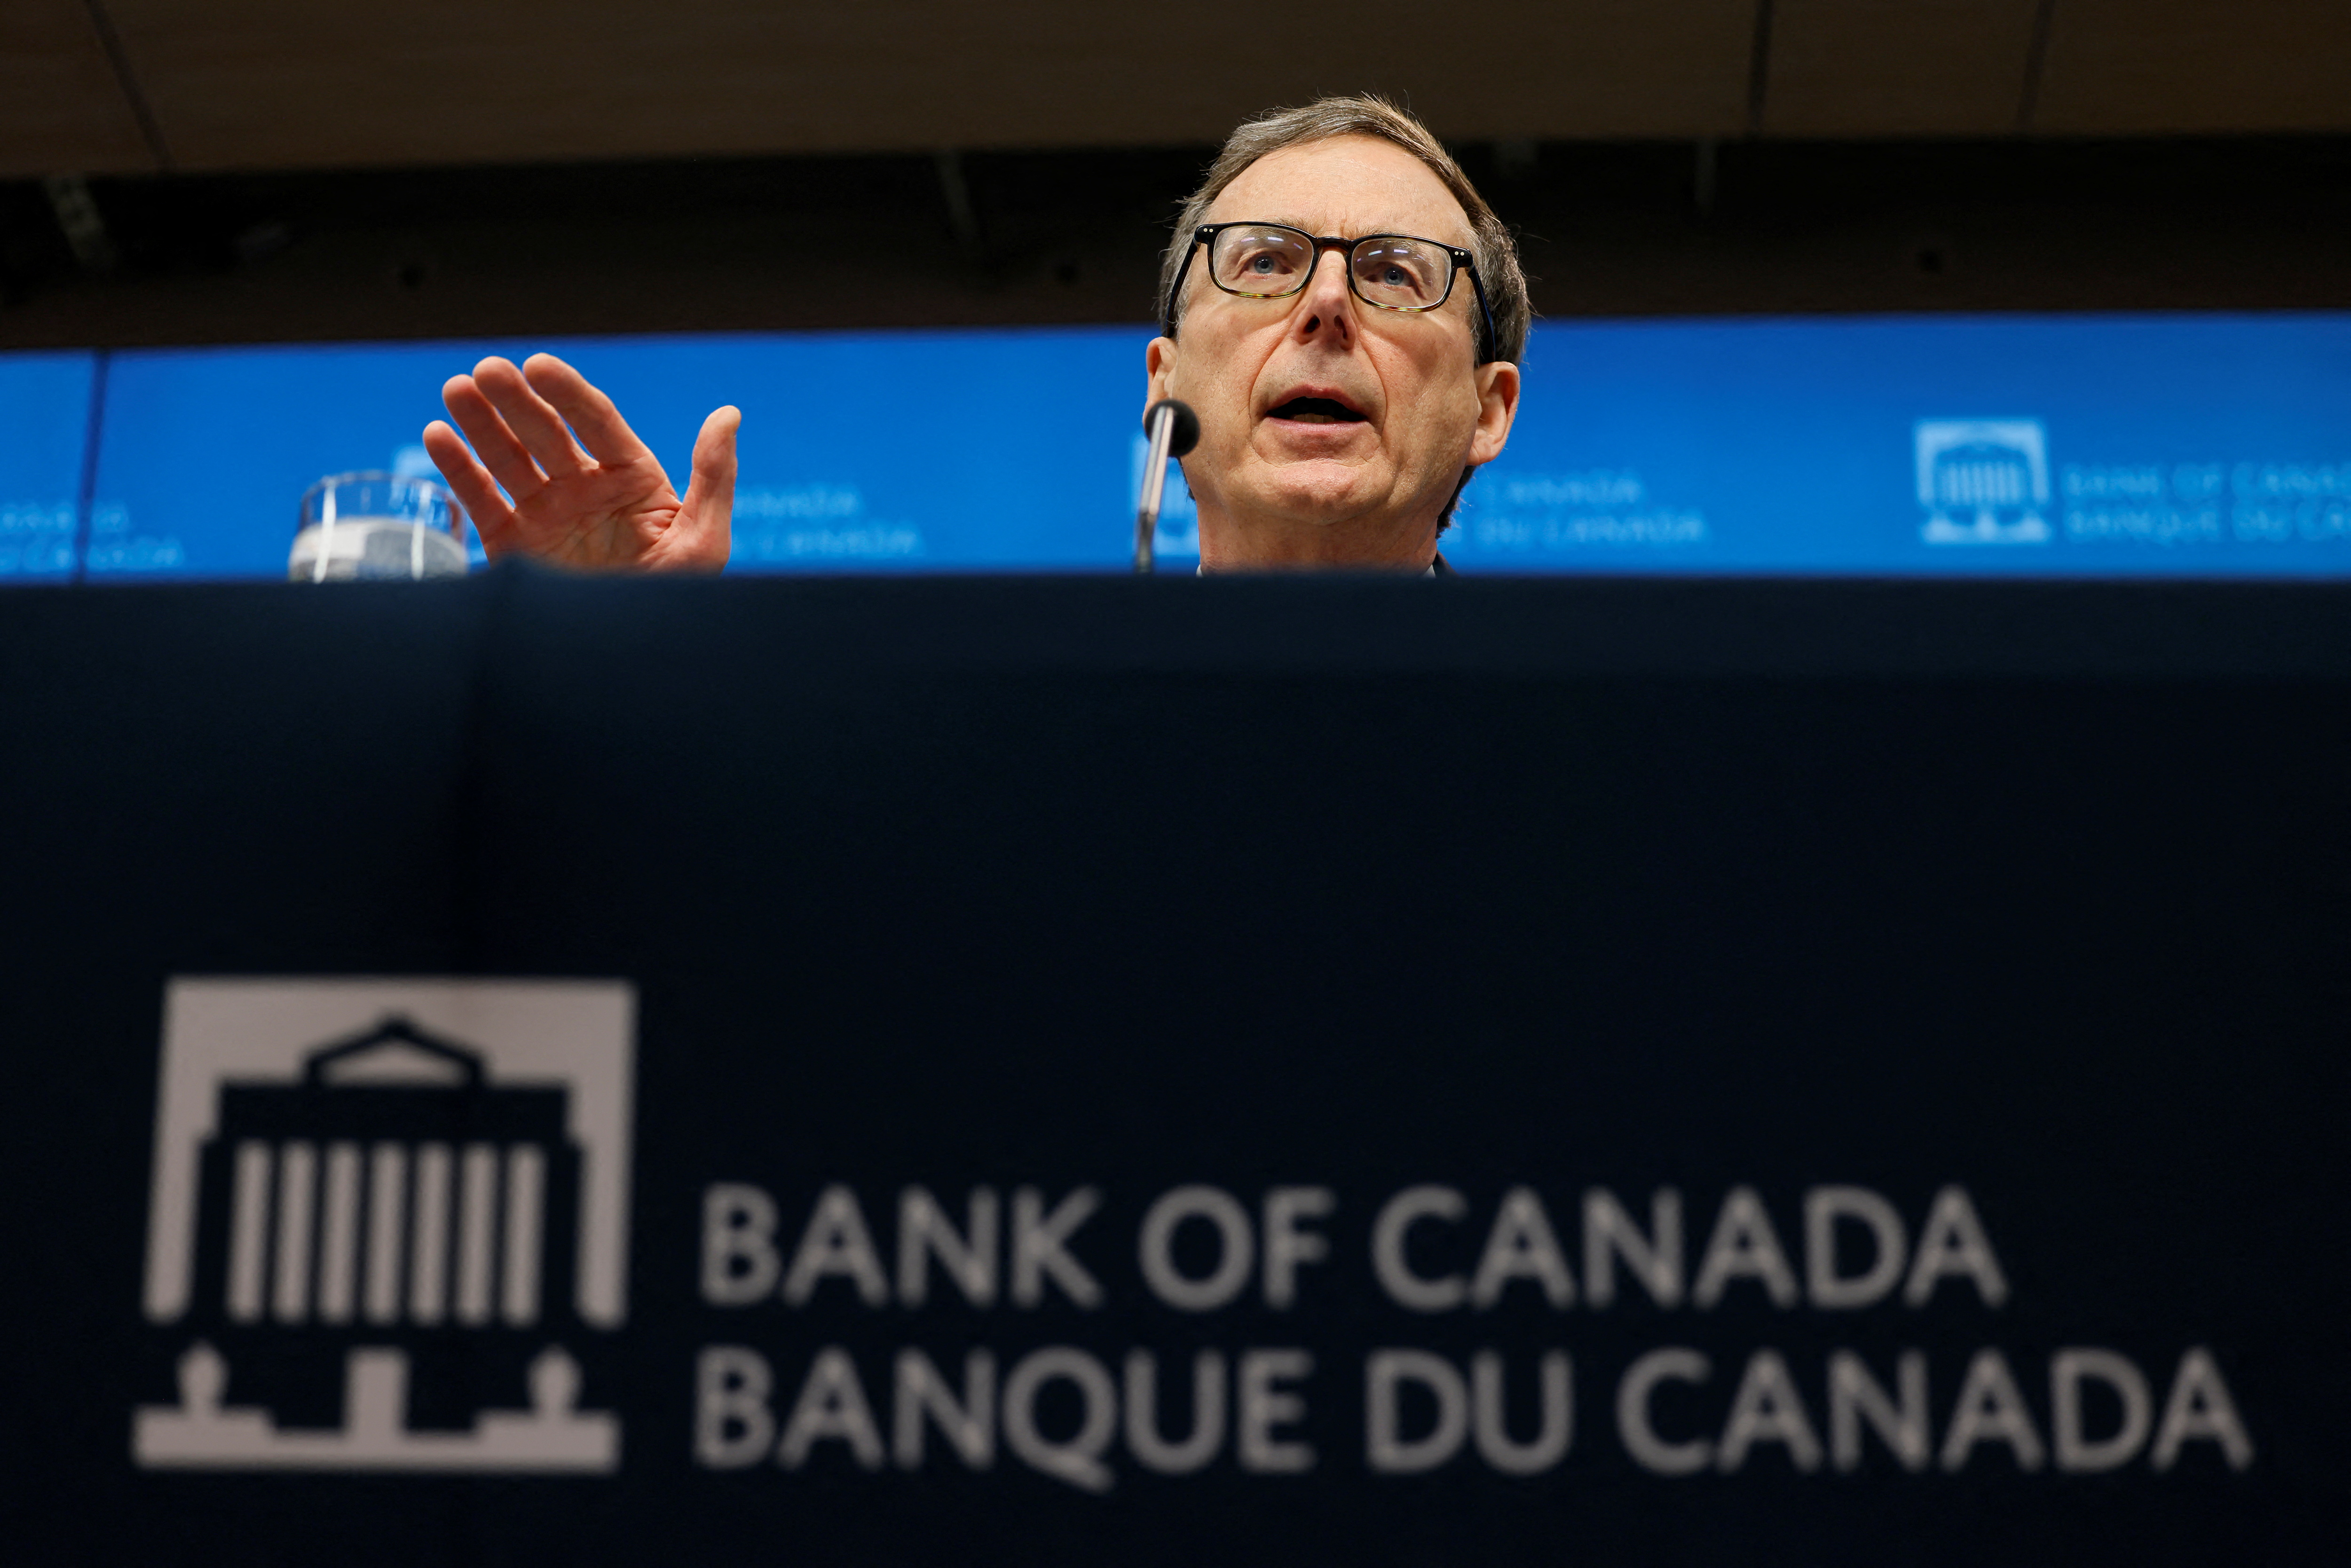 Bank of Canada Governor Tiff Macklem takes part in a news conference in Ottawa